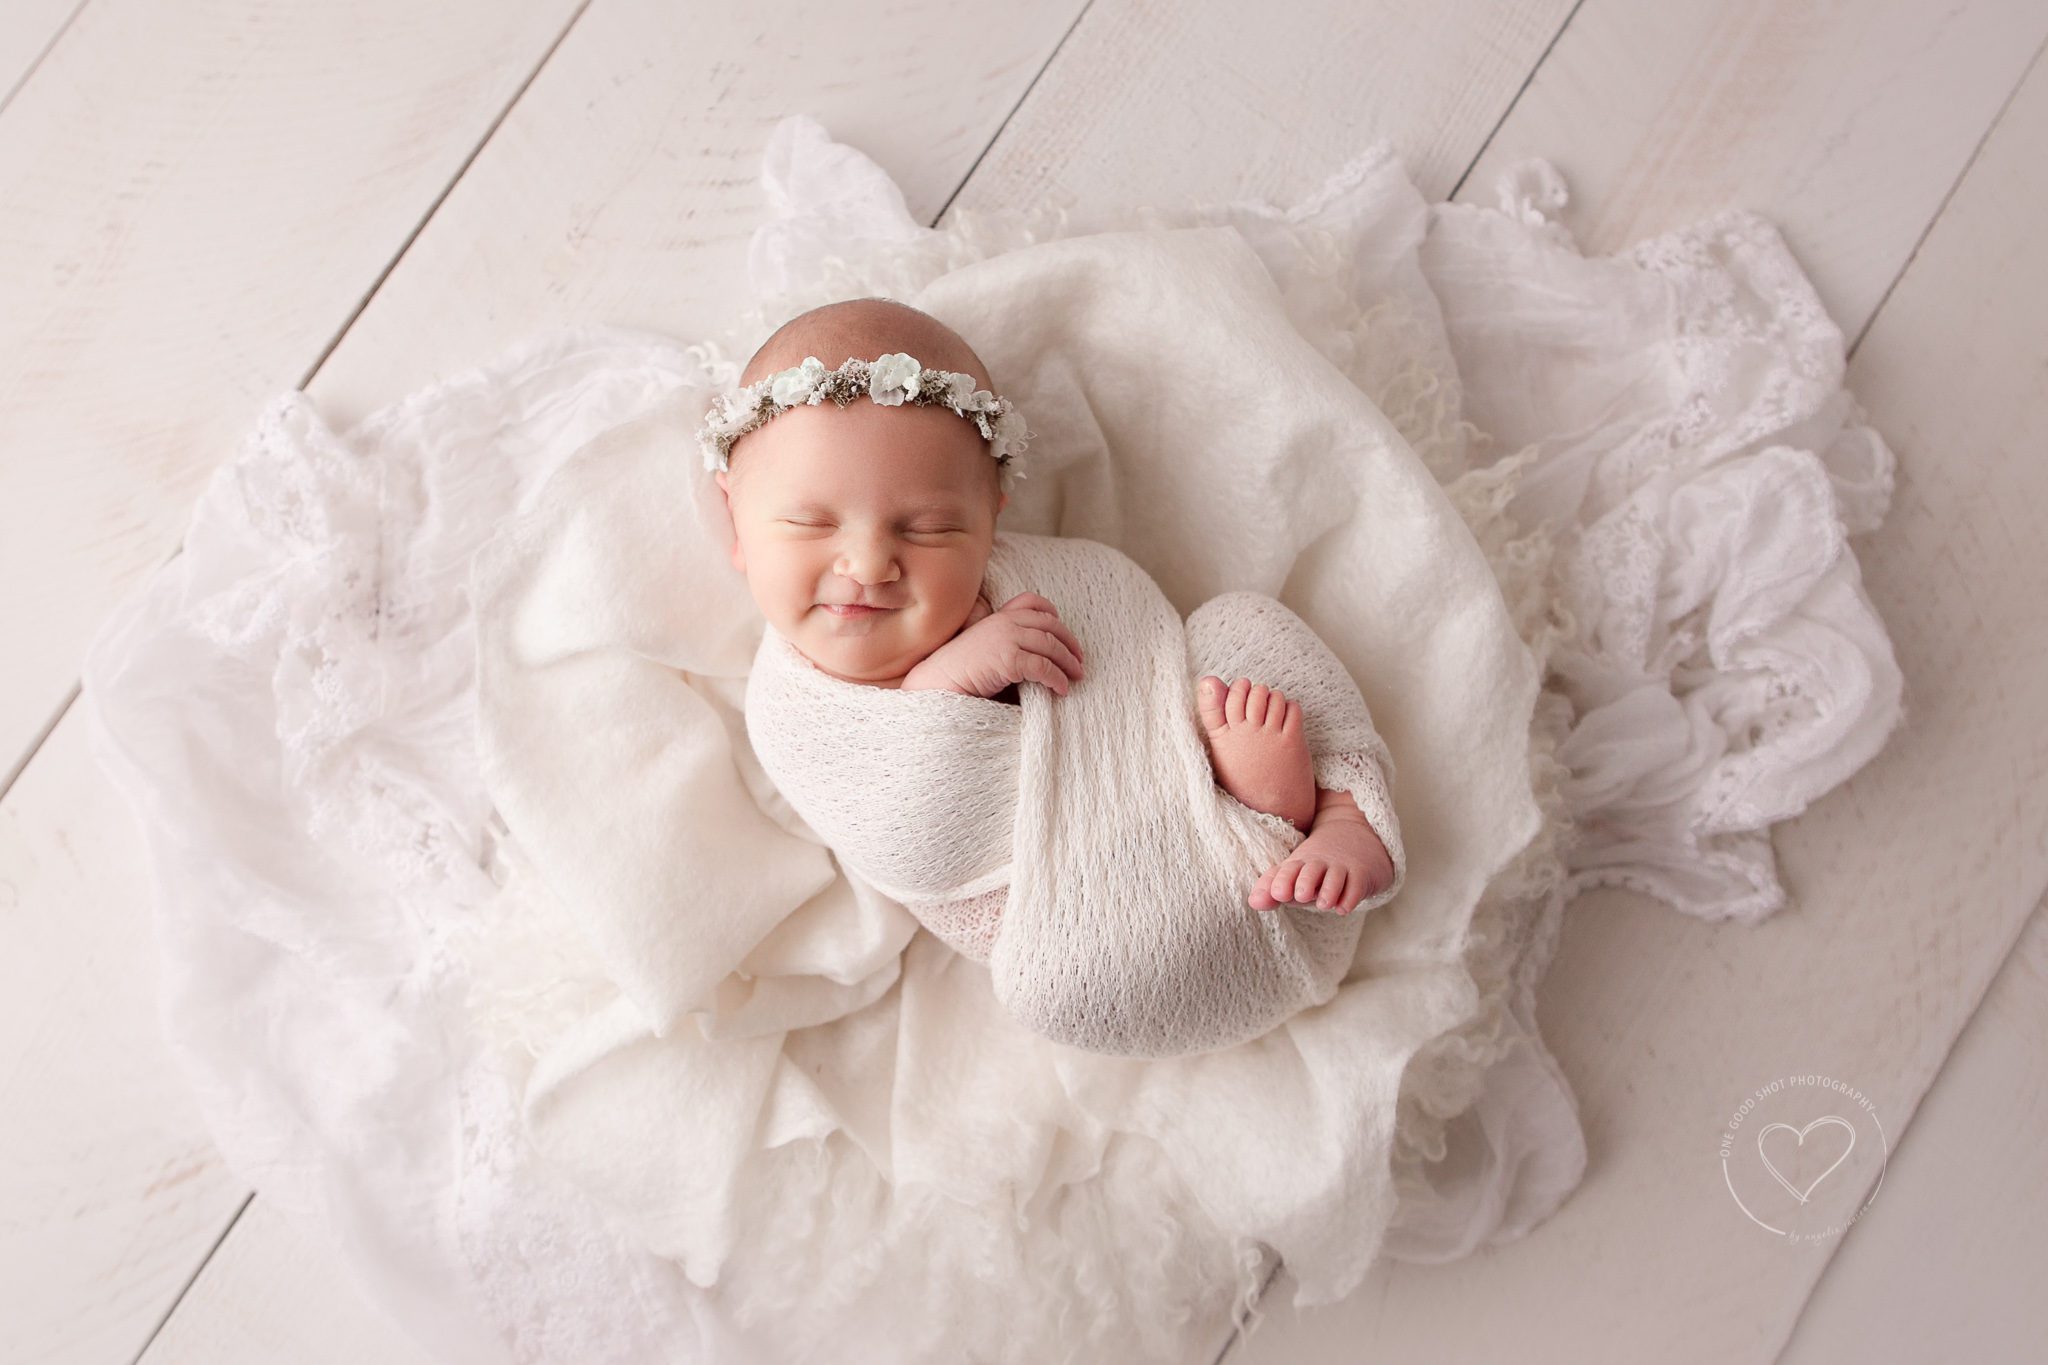 Fresno newborn photography, baby girl wrapped in white, white layers, wood backdrop, white floral halo, baby smiling